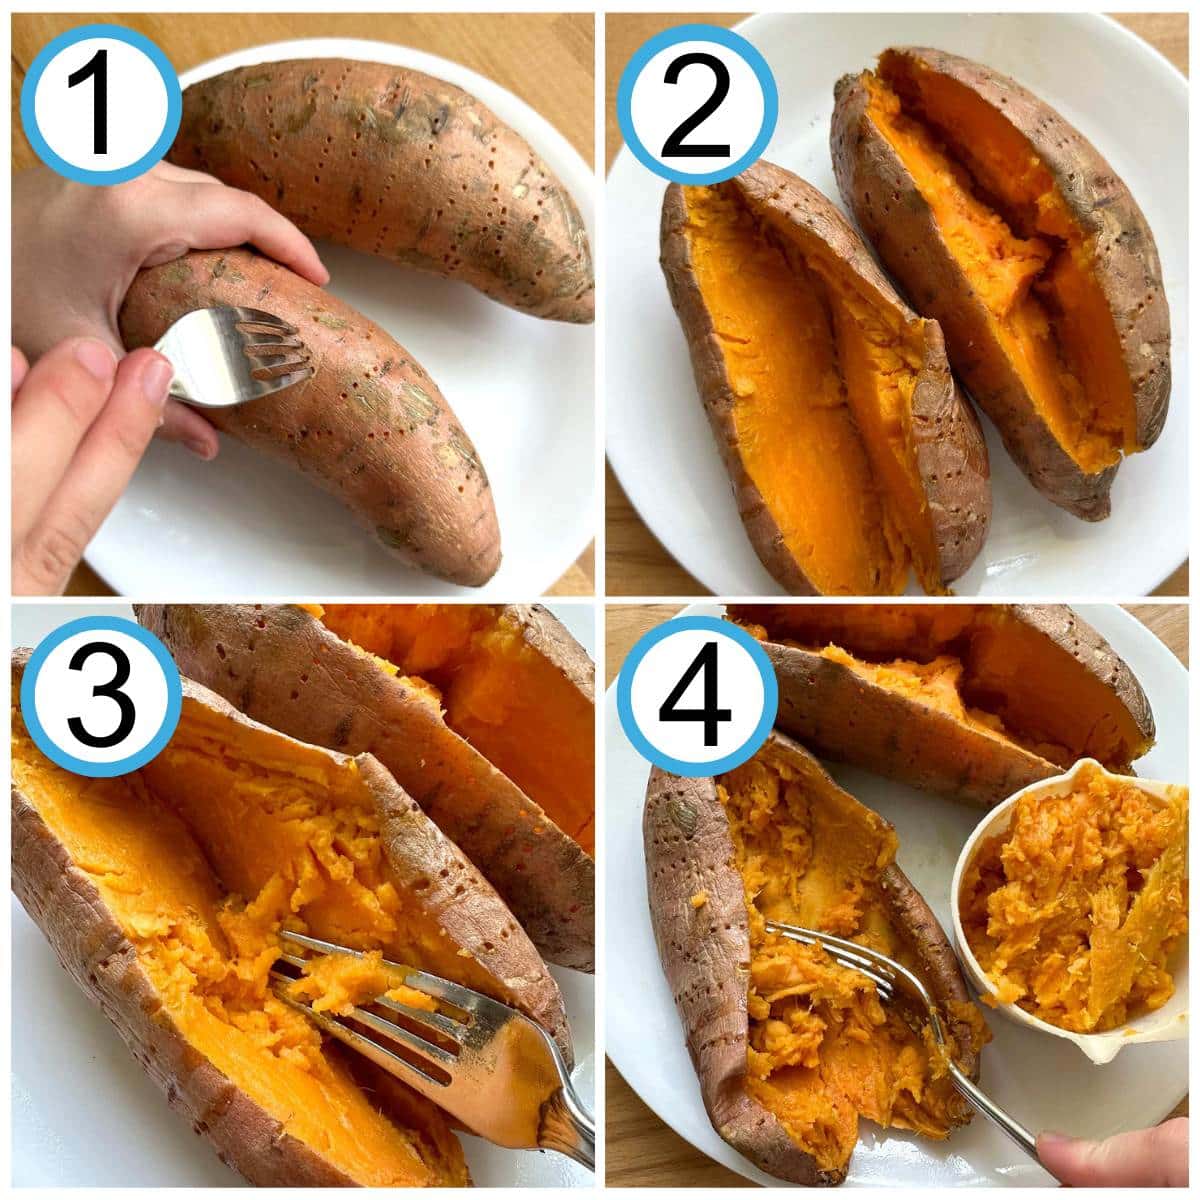 Step by step instructions for making your own sweet potato puree. Step 1 shows sweet potato being poked with a fork. Step 2 shows cooked sweet potatoes sliced open. Step 3 shows mashing of cooked sweet potato. Step 4 shows measuring the sweet potato mash.